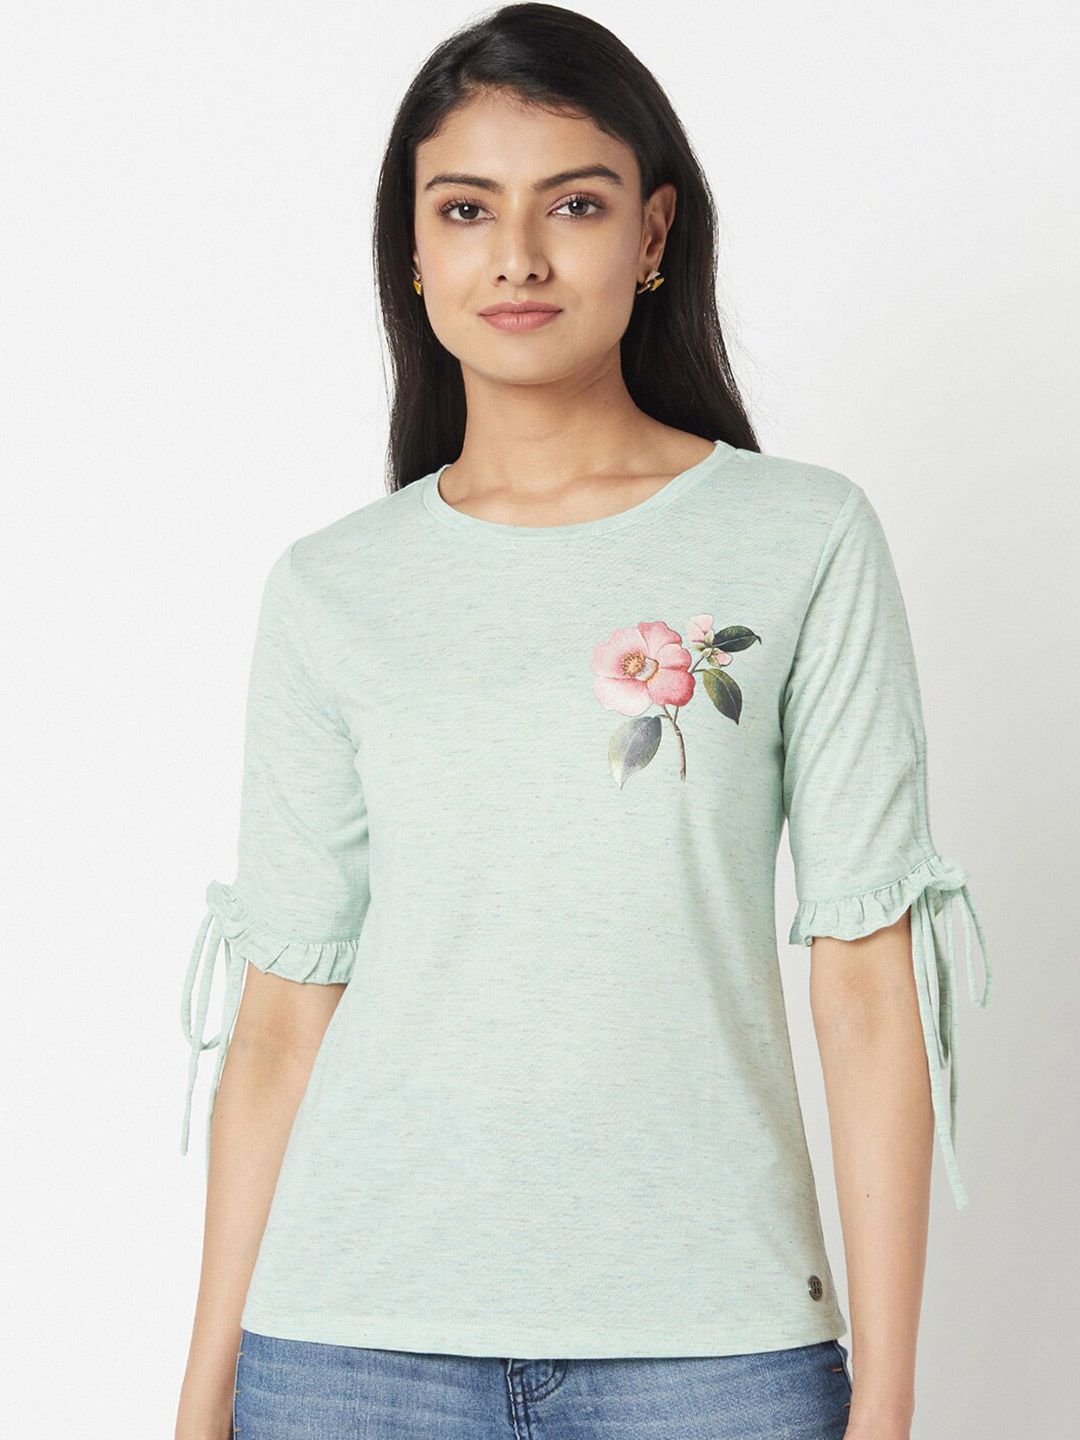 Miss Grace Embroidered Regular Top Price in India